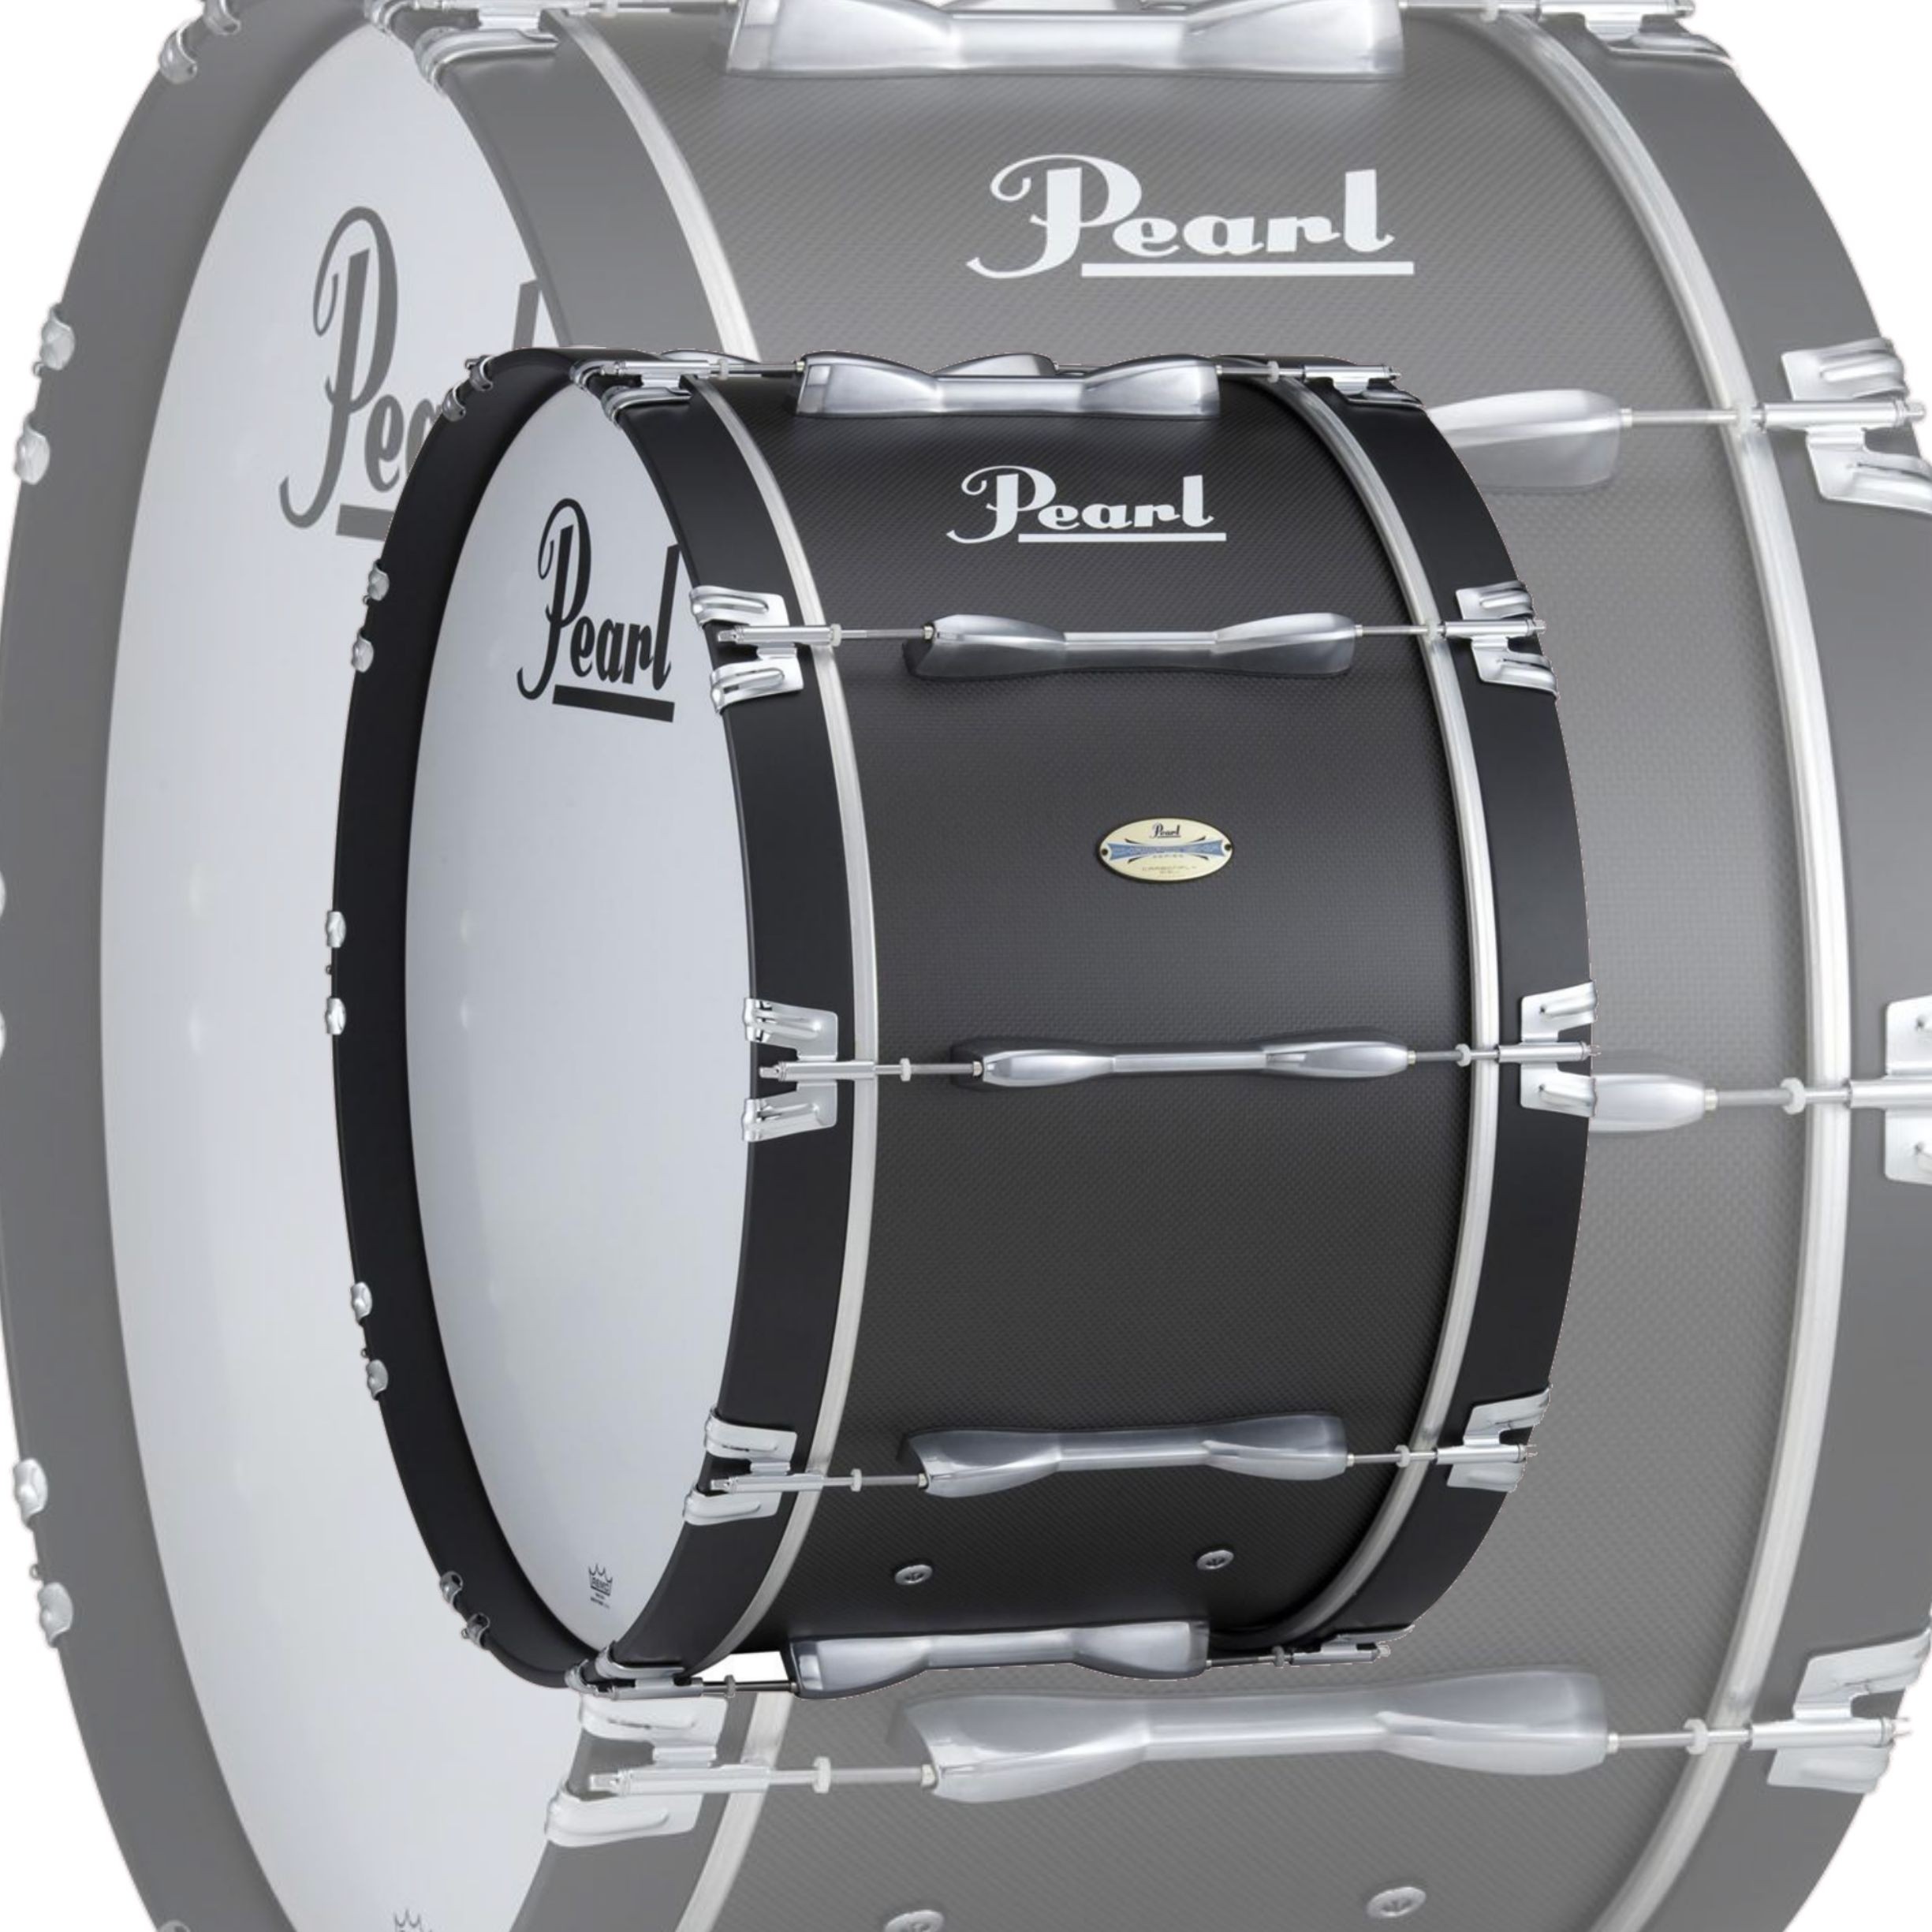 Pearl CarbonPly Championship 26"x14"  Marching Bass Drum